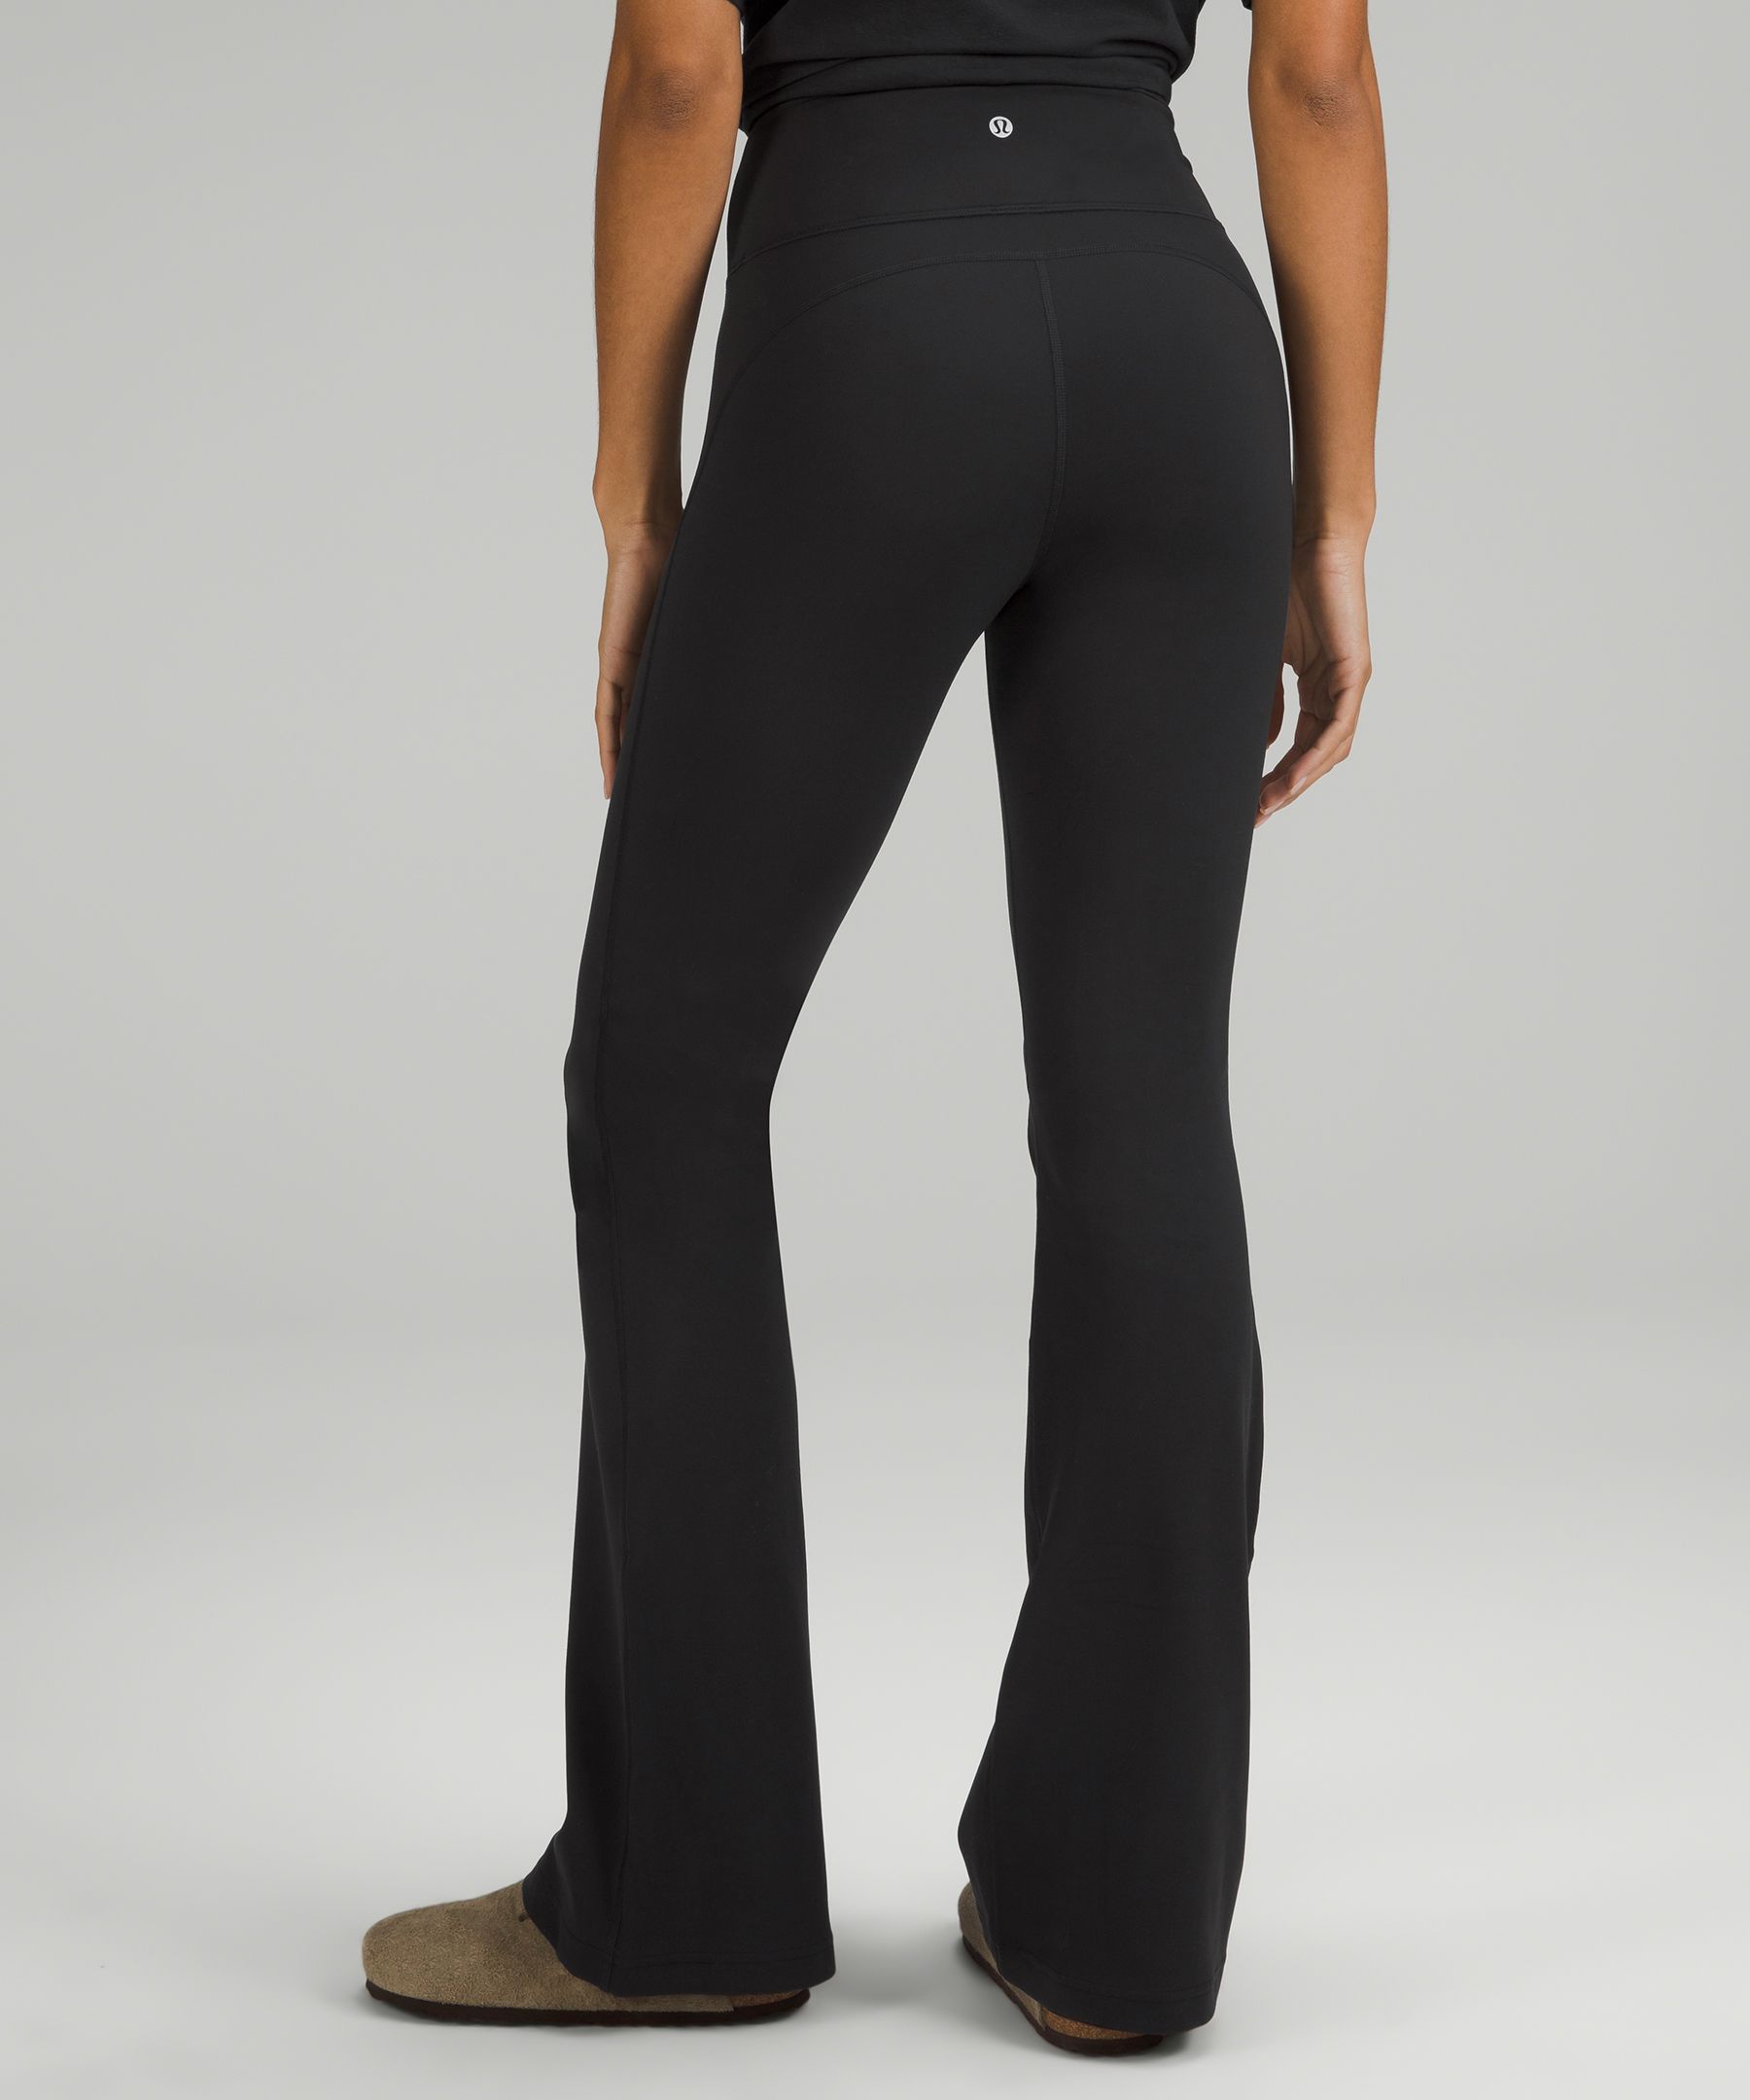 Groove Pant Flare Nulu (6CAD) 🥰 I have the black and this is the navy. BUY  BUY BUY haha sooo comfy. So flattering. Perfect for training and for out  and about. If